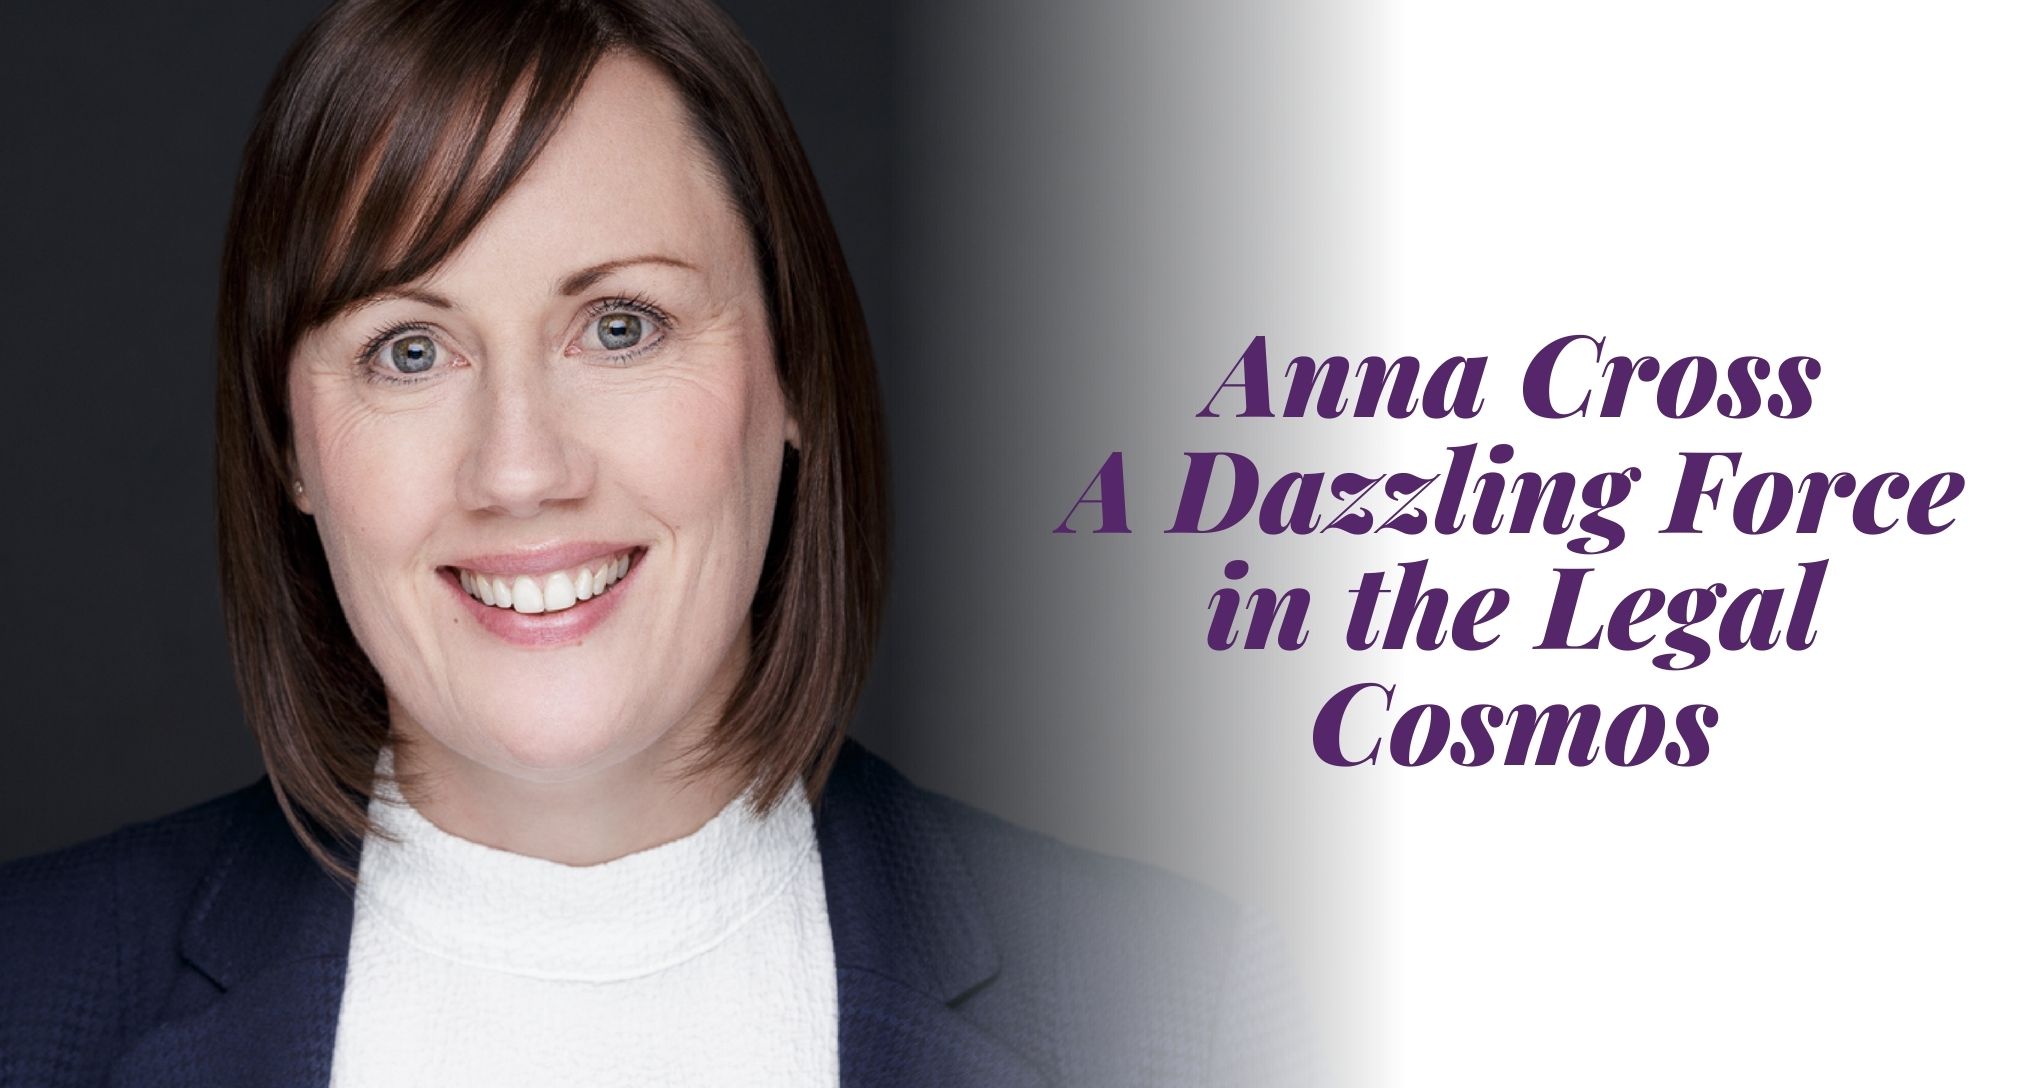 Unraveling Anna Cross: A Dazzling Force in the Legal Cosmos